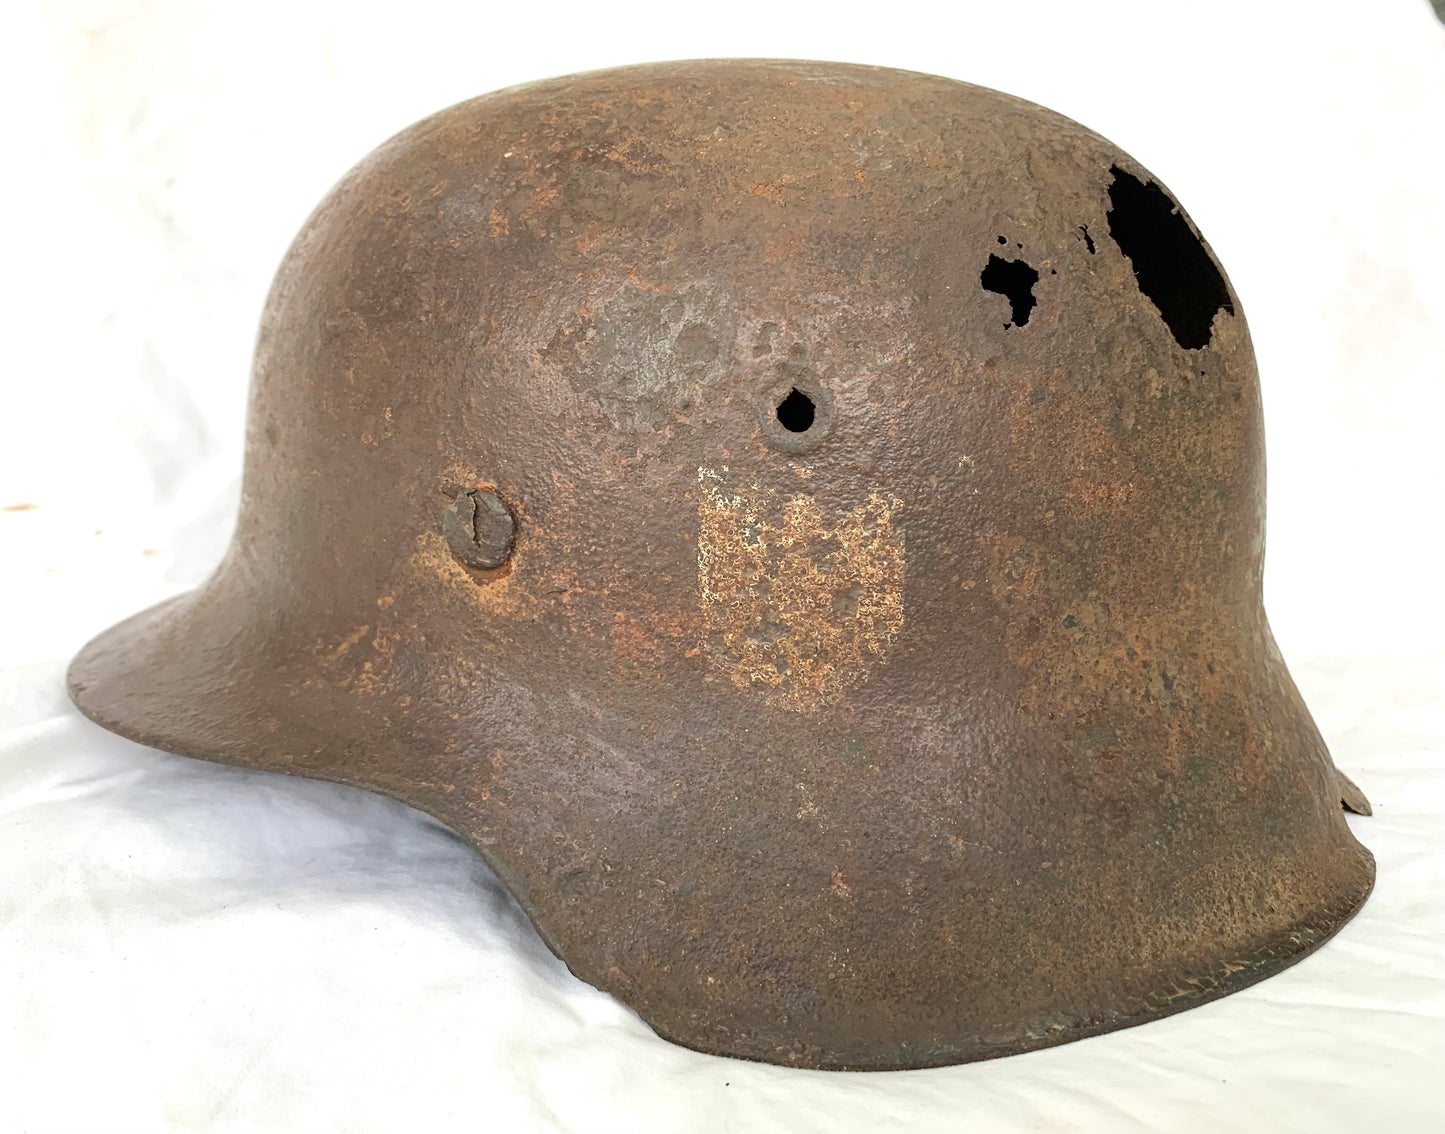 WW2 German M42 single decal Battle Damaged Helmet with Liner recovered from the Eastern Front